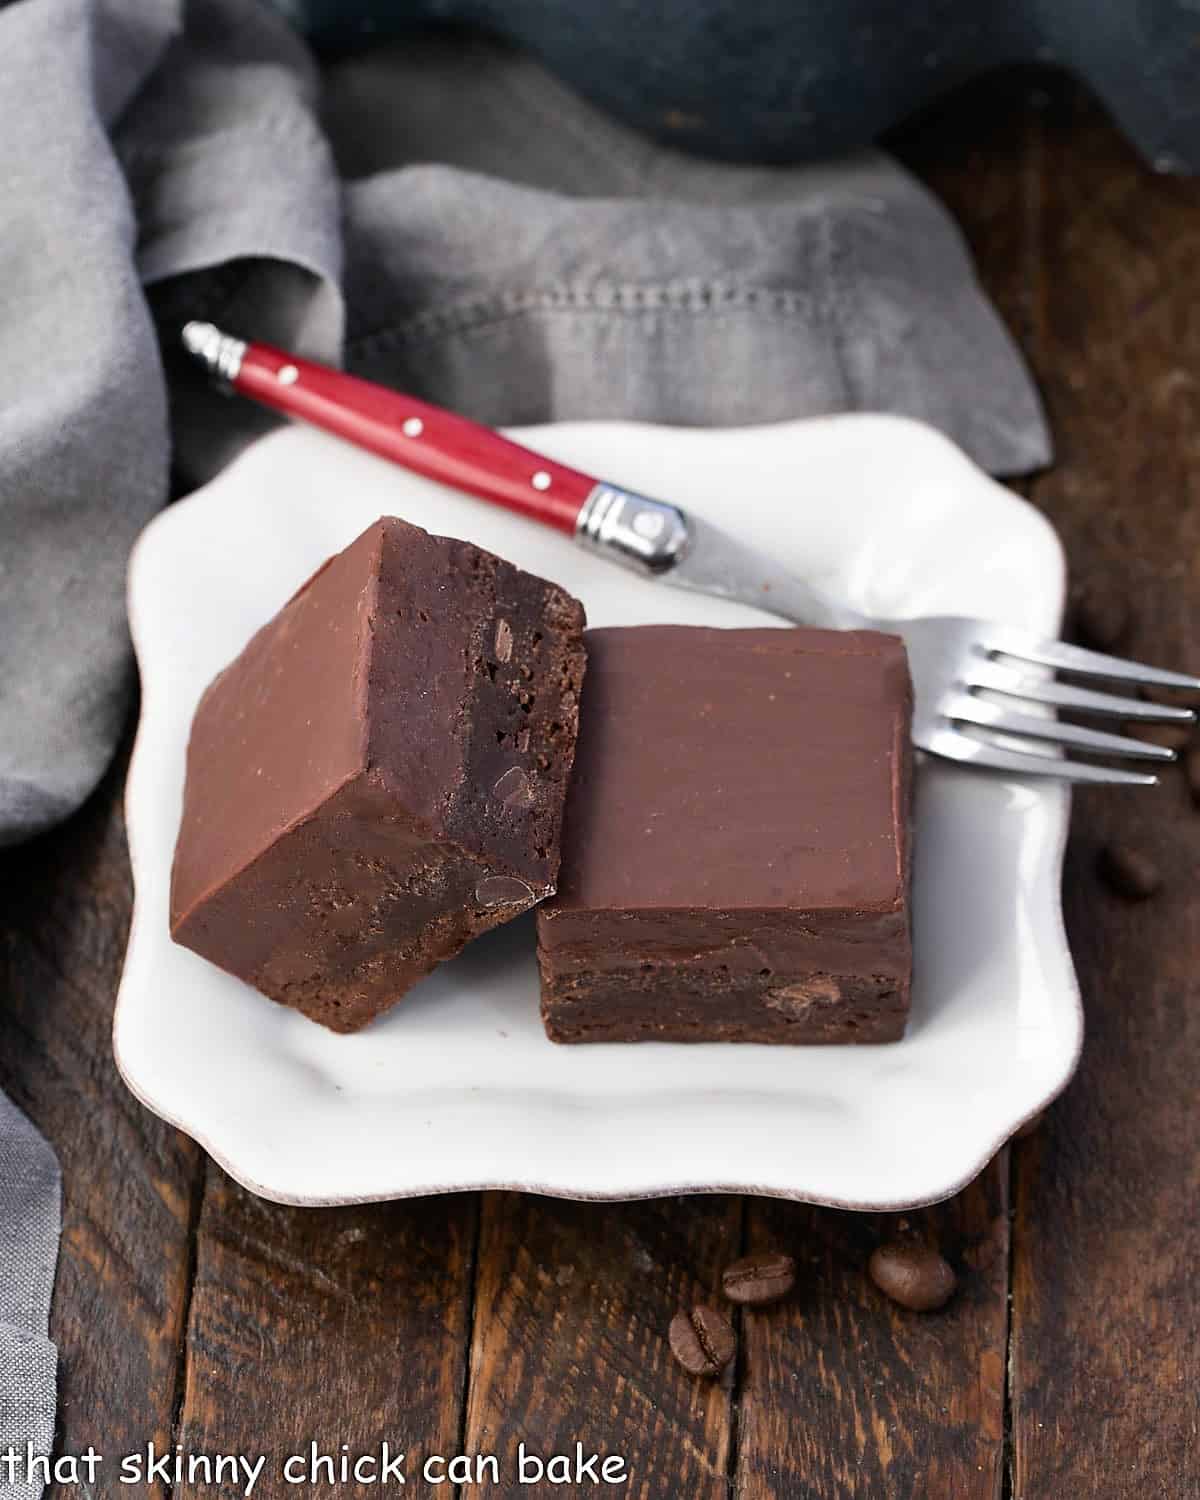 Two kalua fudge topped brownies on a square white plate with a red handle fork.